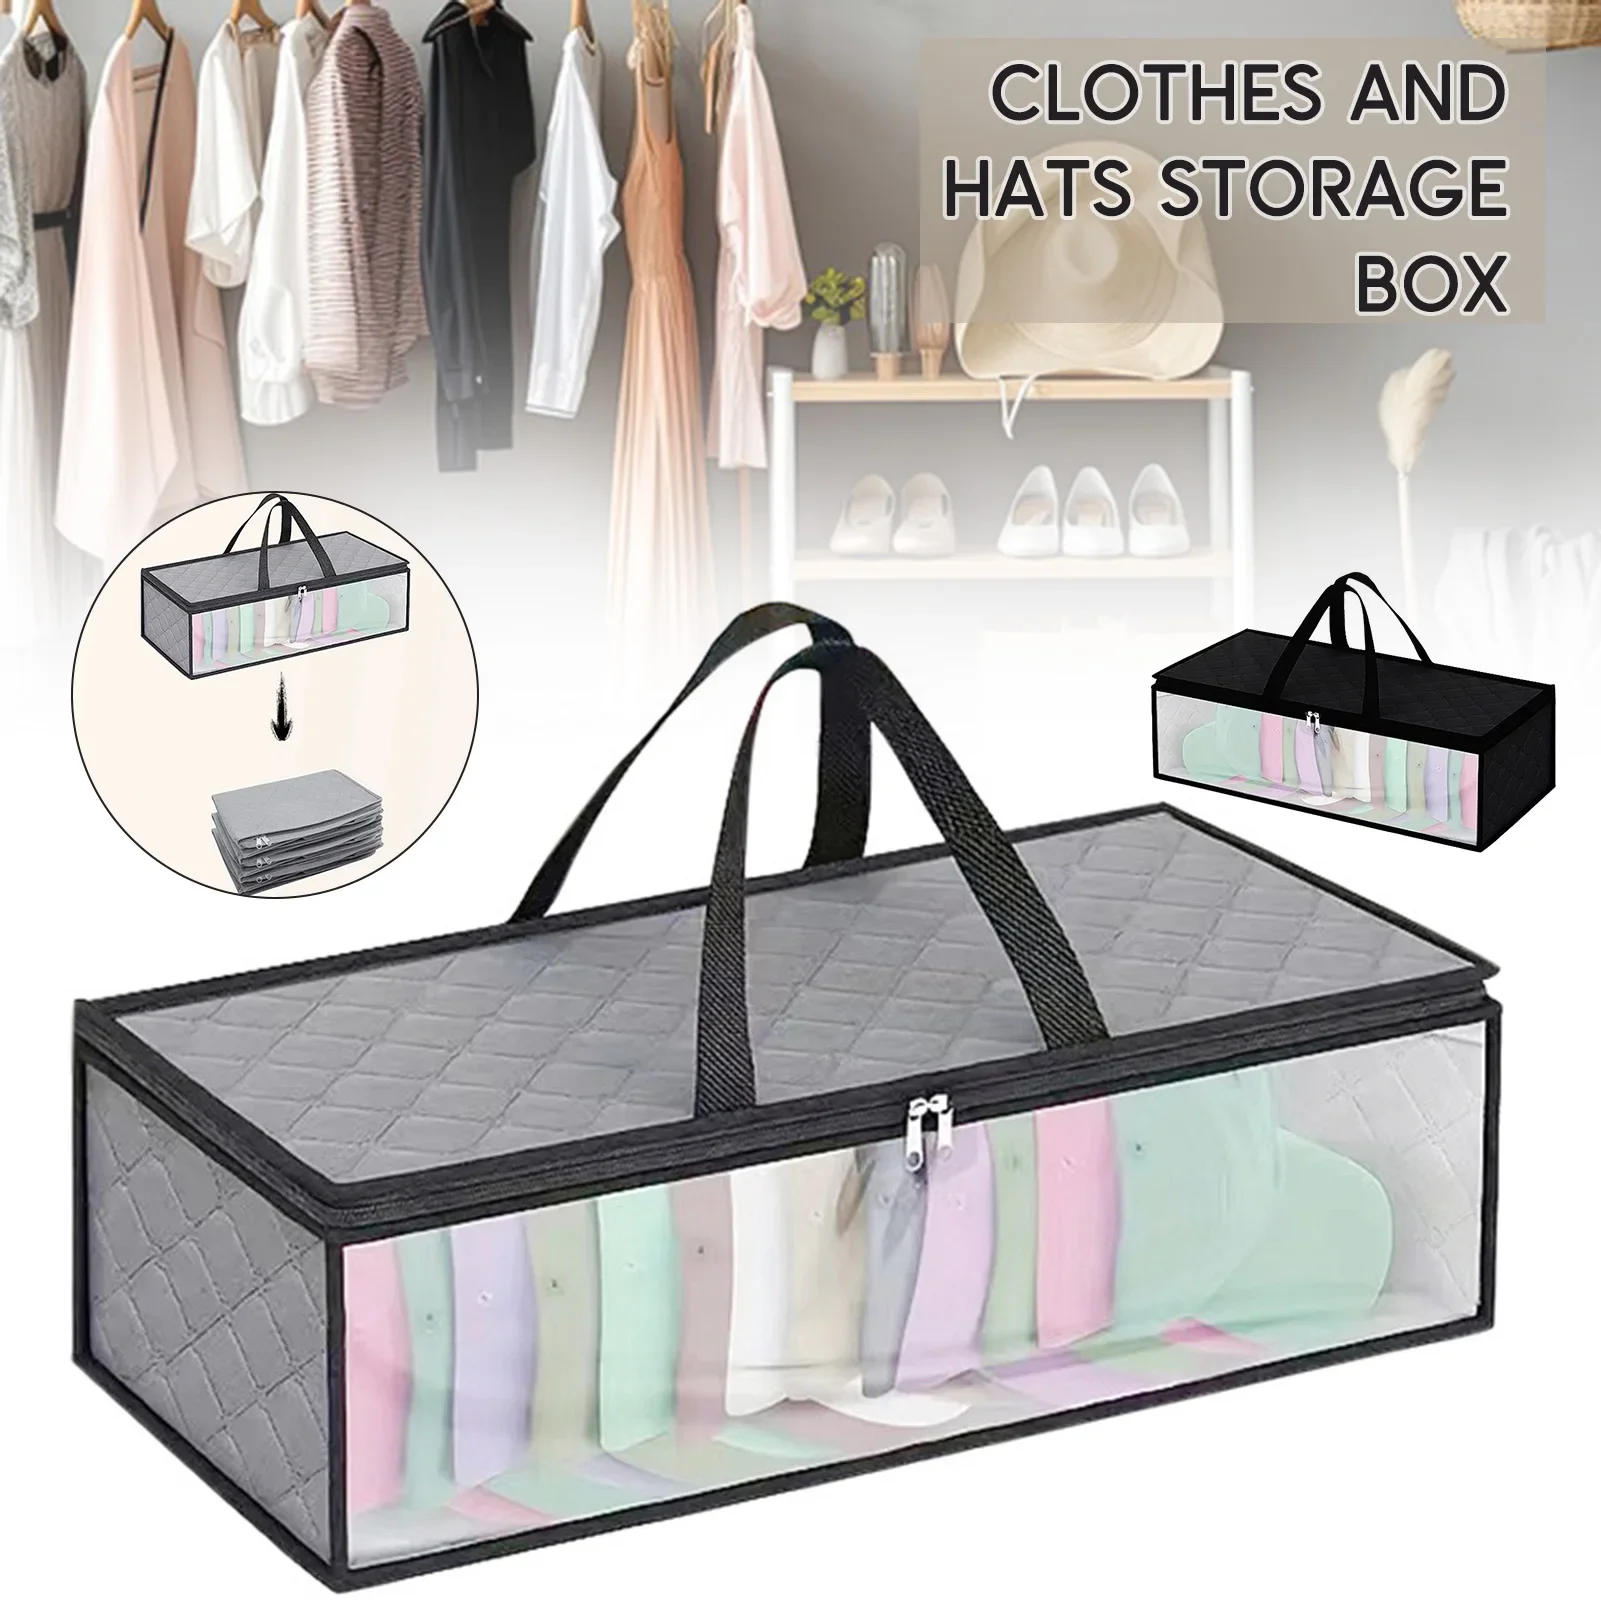 

Foldable Storage Bag for Home,Underbed Non-woven Organizing Boxes,Multipurpose Dustproof Packing Case for Clothes Shoe Hat Toy